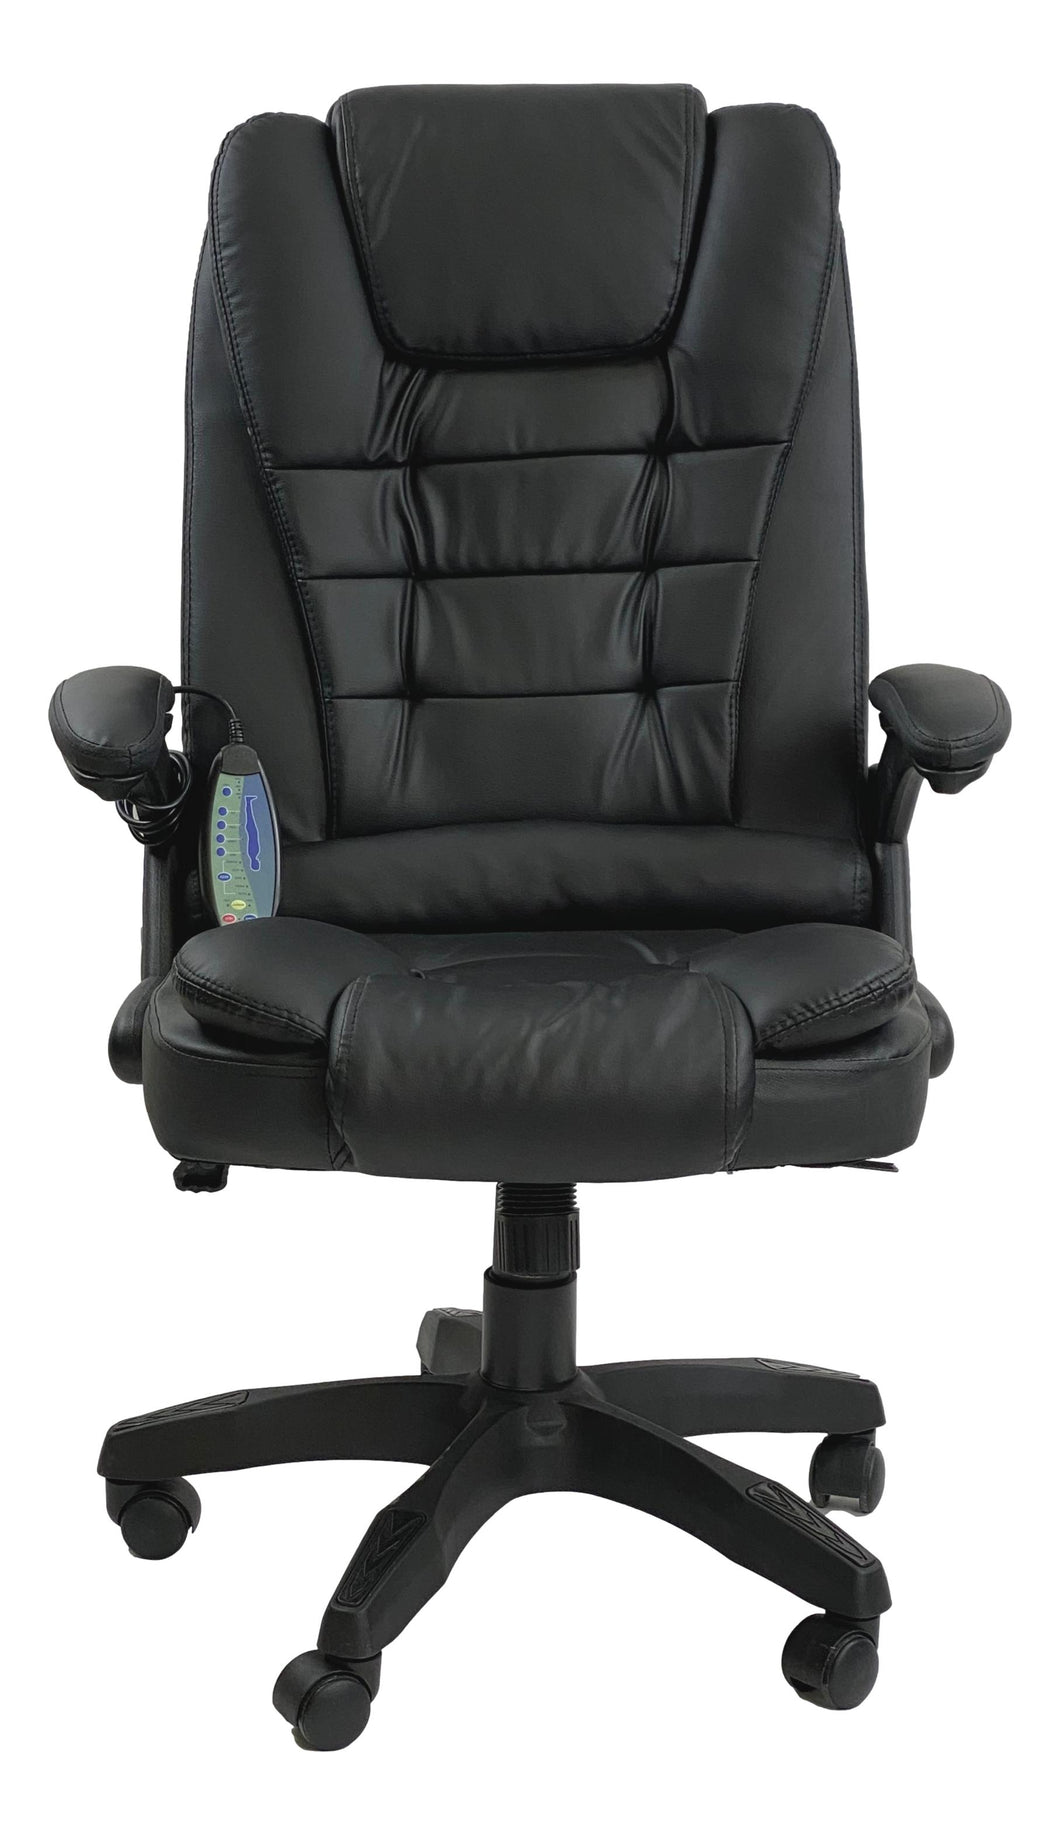 OFFICE SERIES/ 1119 COMPUTER OFFICE CHAIR (BLACK)